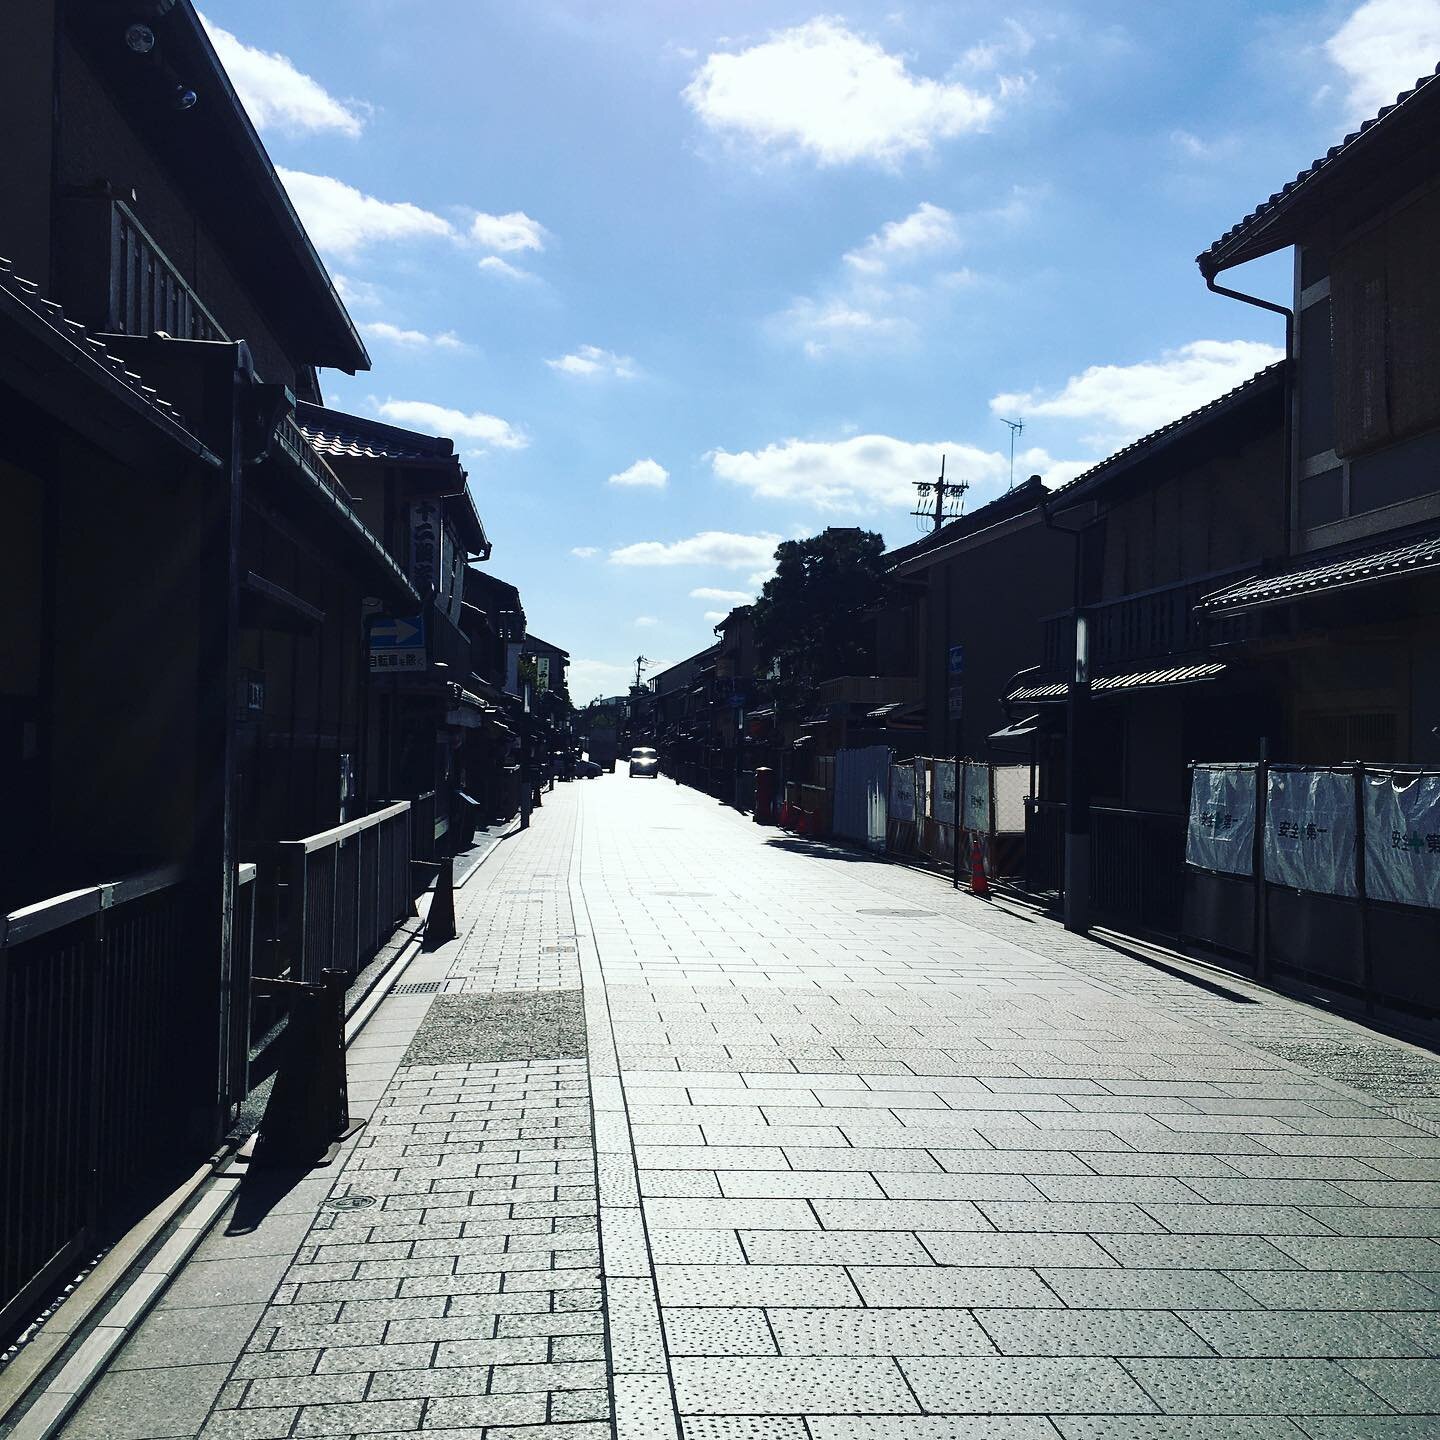 Under restrictions, most popular street in #kyoto turns a surreal fiction like landscape. #hanamikoji #kyoto #covid_19 #lockdown